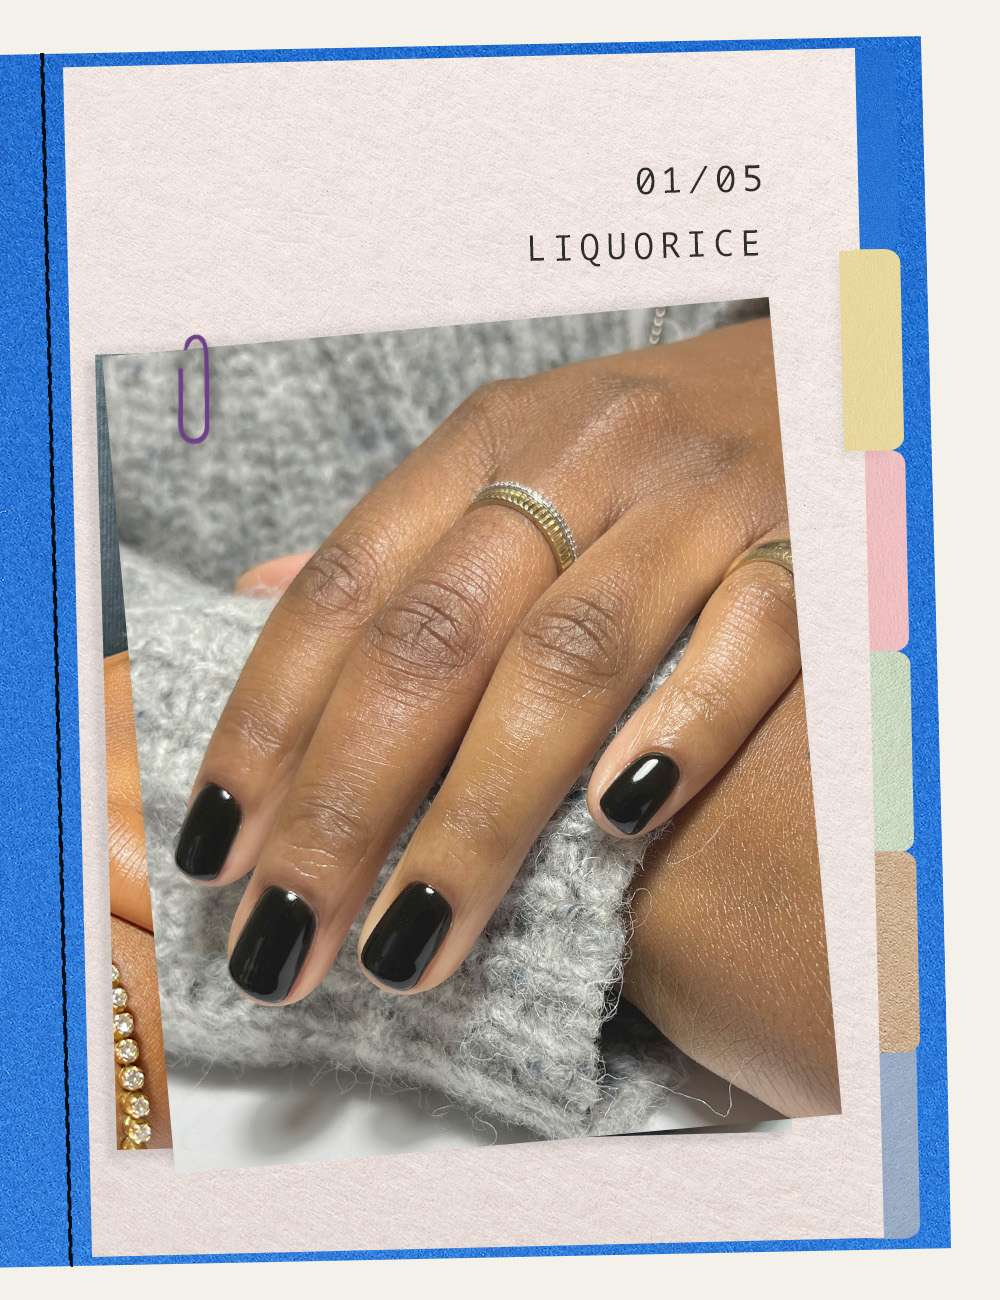 The Best Nail Trends of the Moment According to Julia Diogo | Liberty